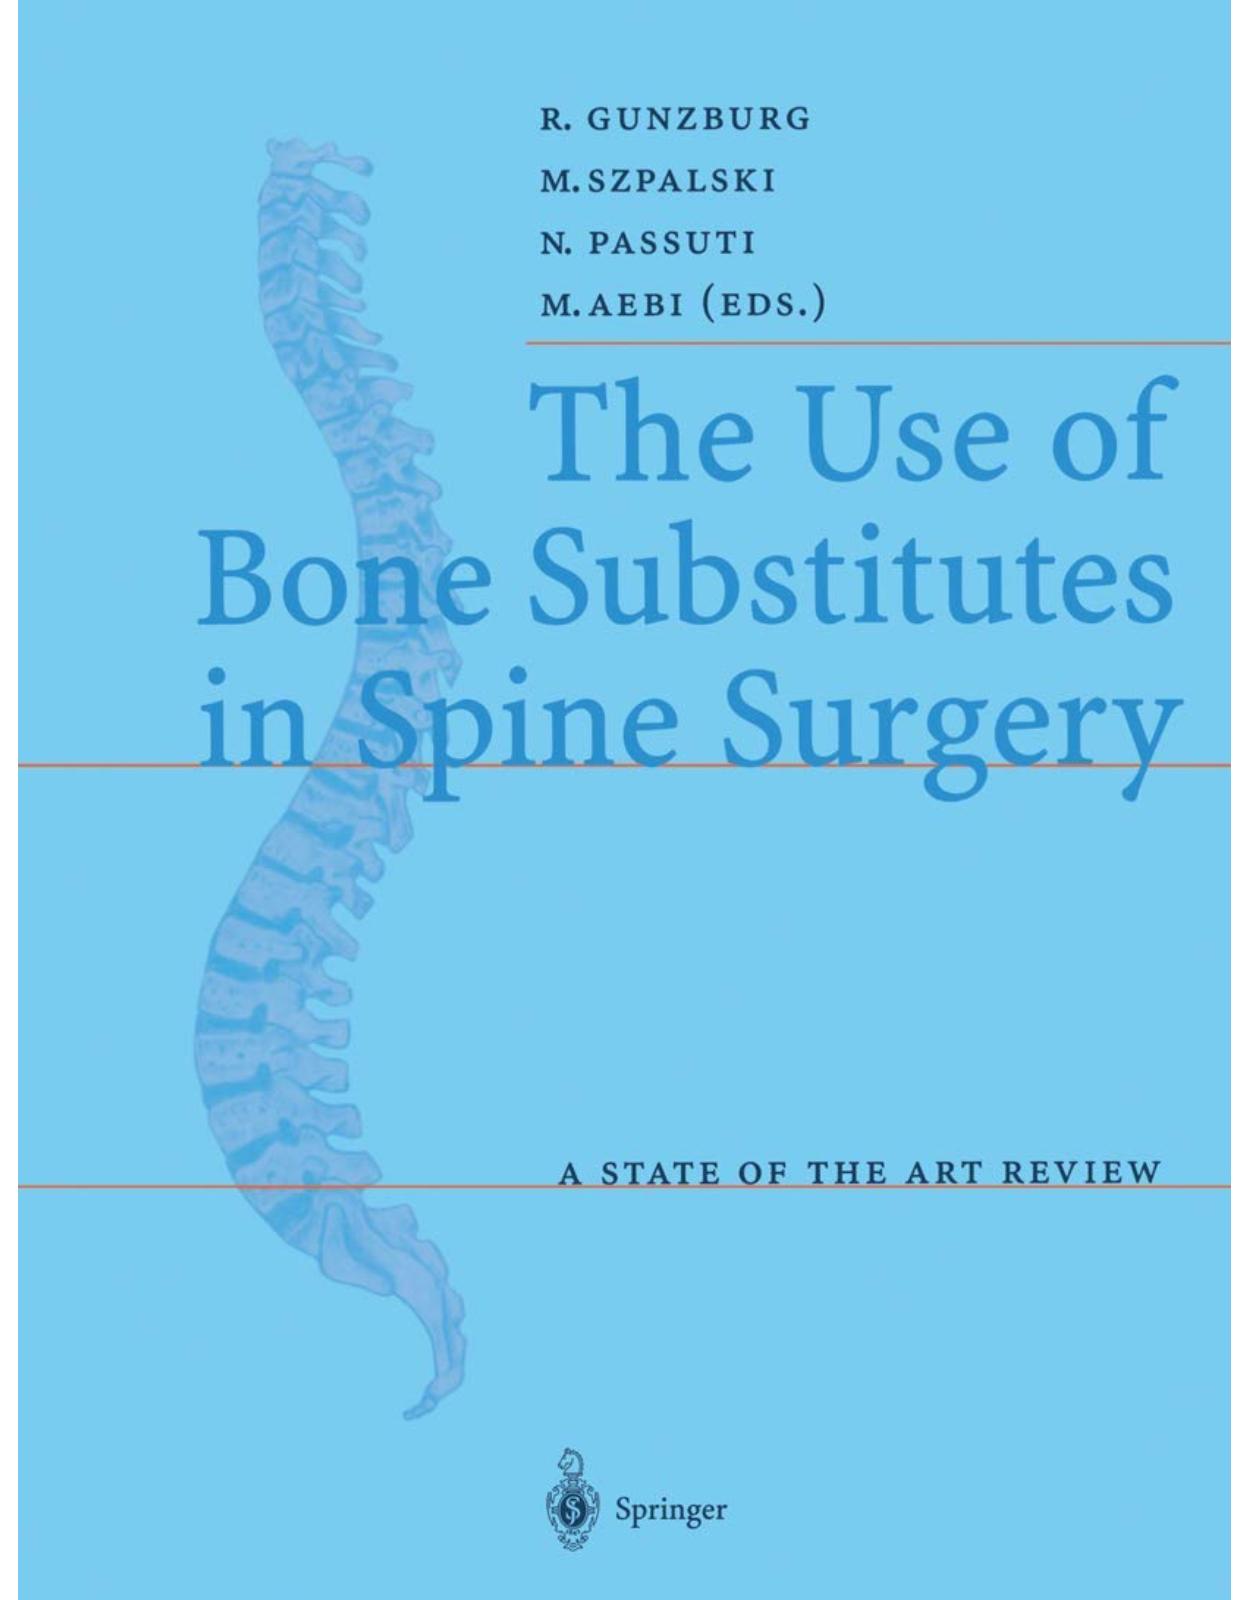 The Use of Bone Substitutes in Spine Surgery